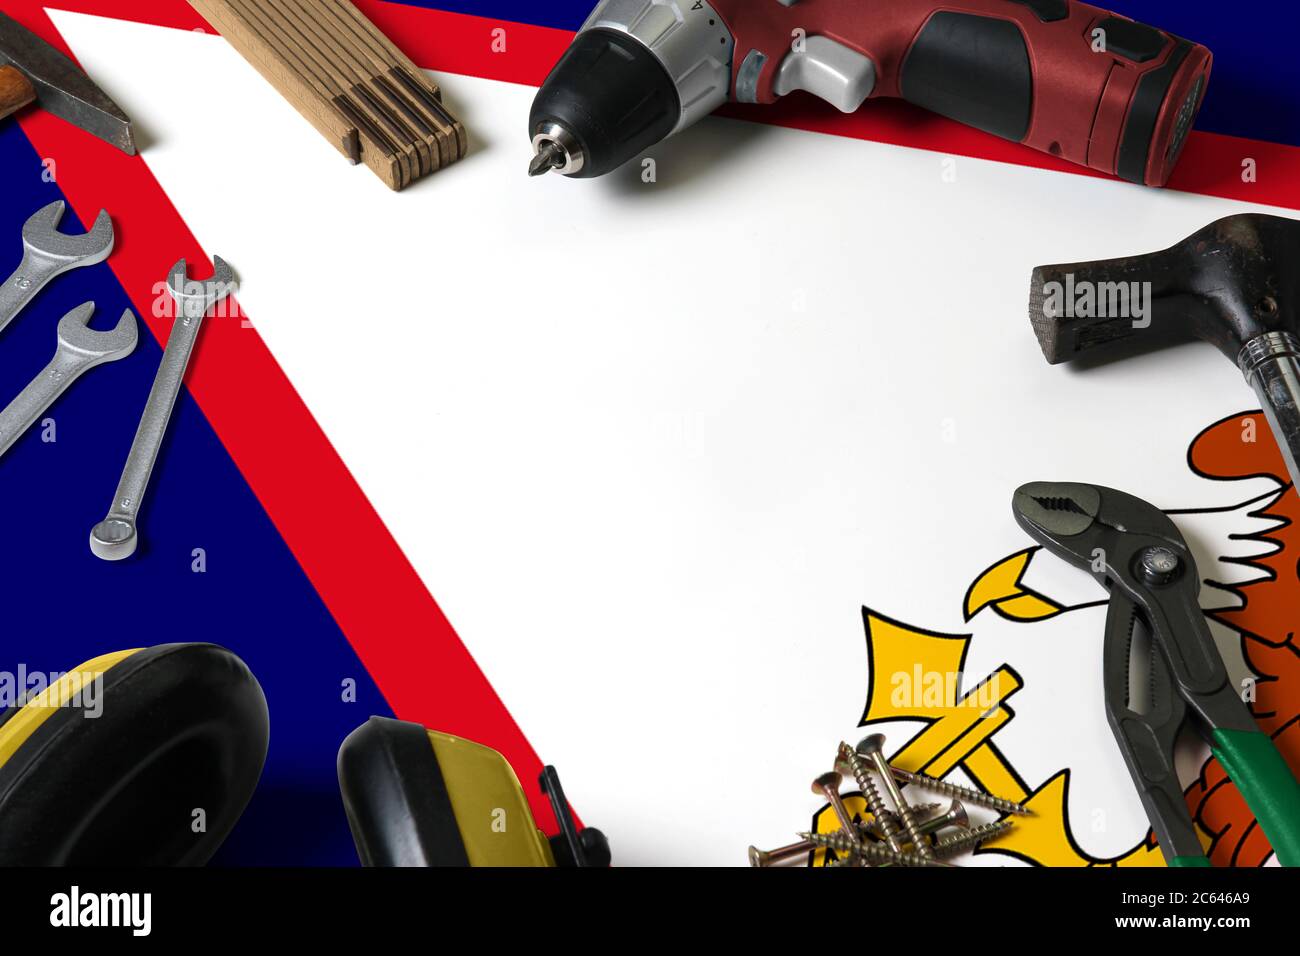 American Samoa flag on repair tool concept wooden table background. Mechanical service theme with national objects. Stock Photo